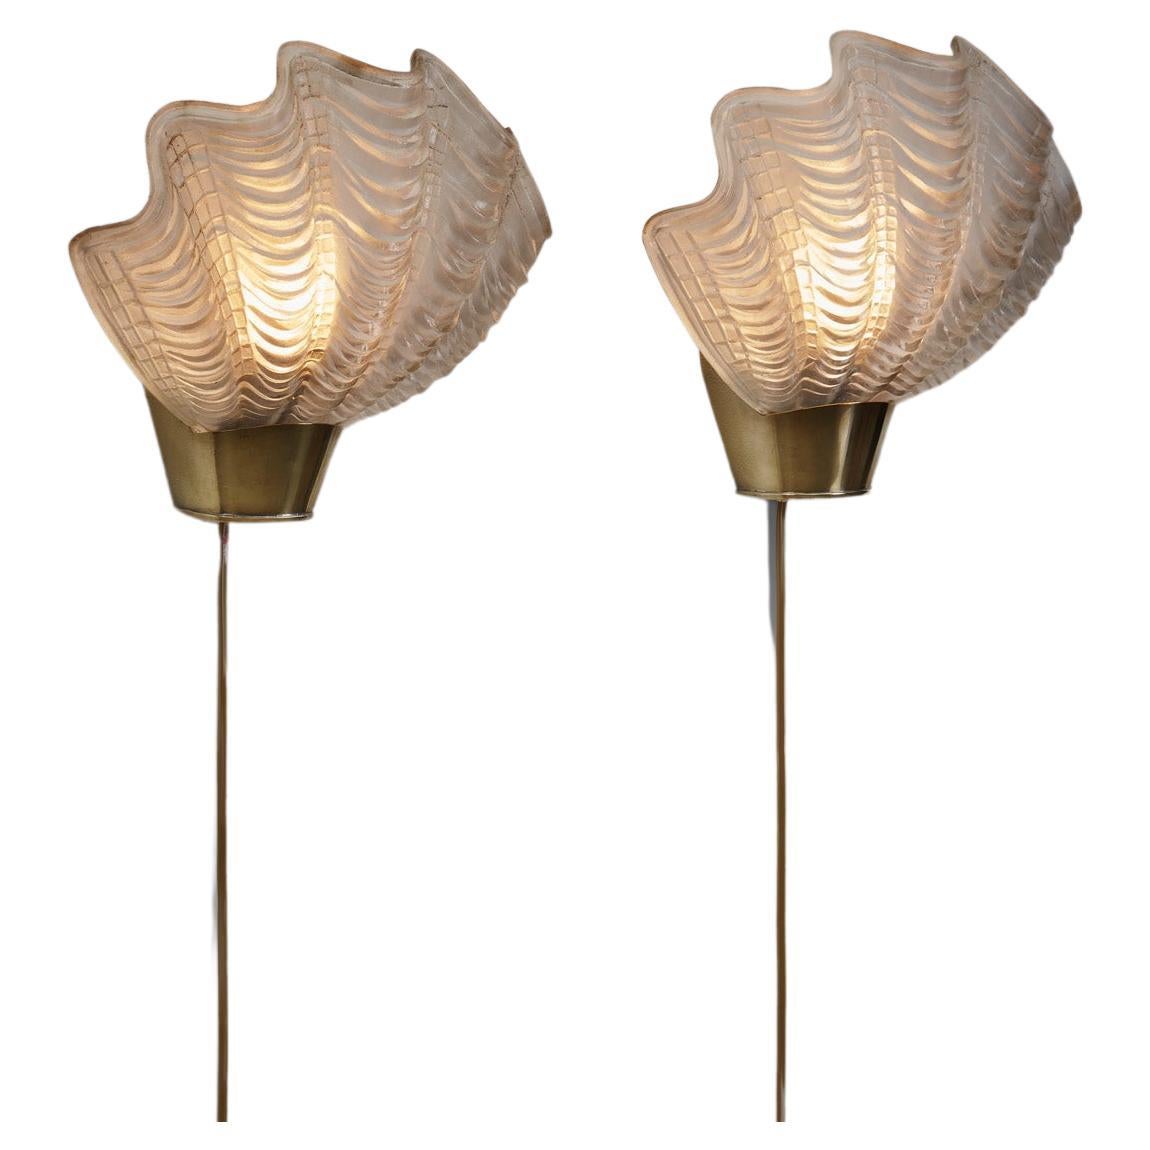 ASEA Skandia "Coquille" Brass and Glass Wall Lamps, Sweden 1940s For Sale